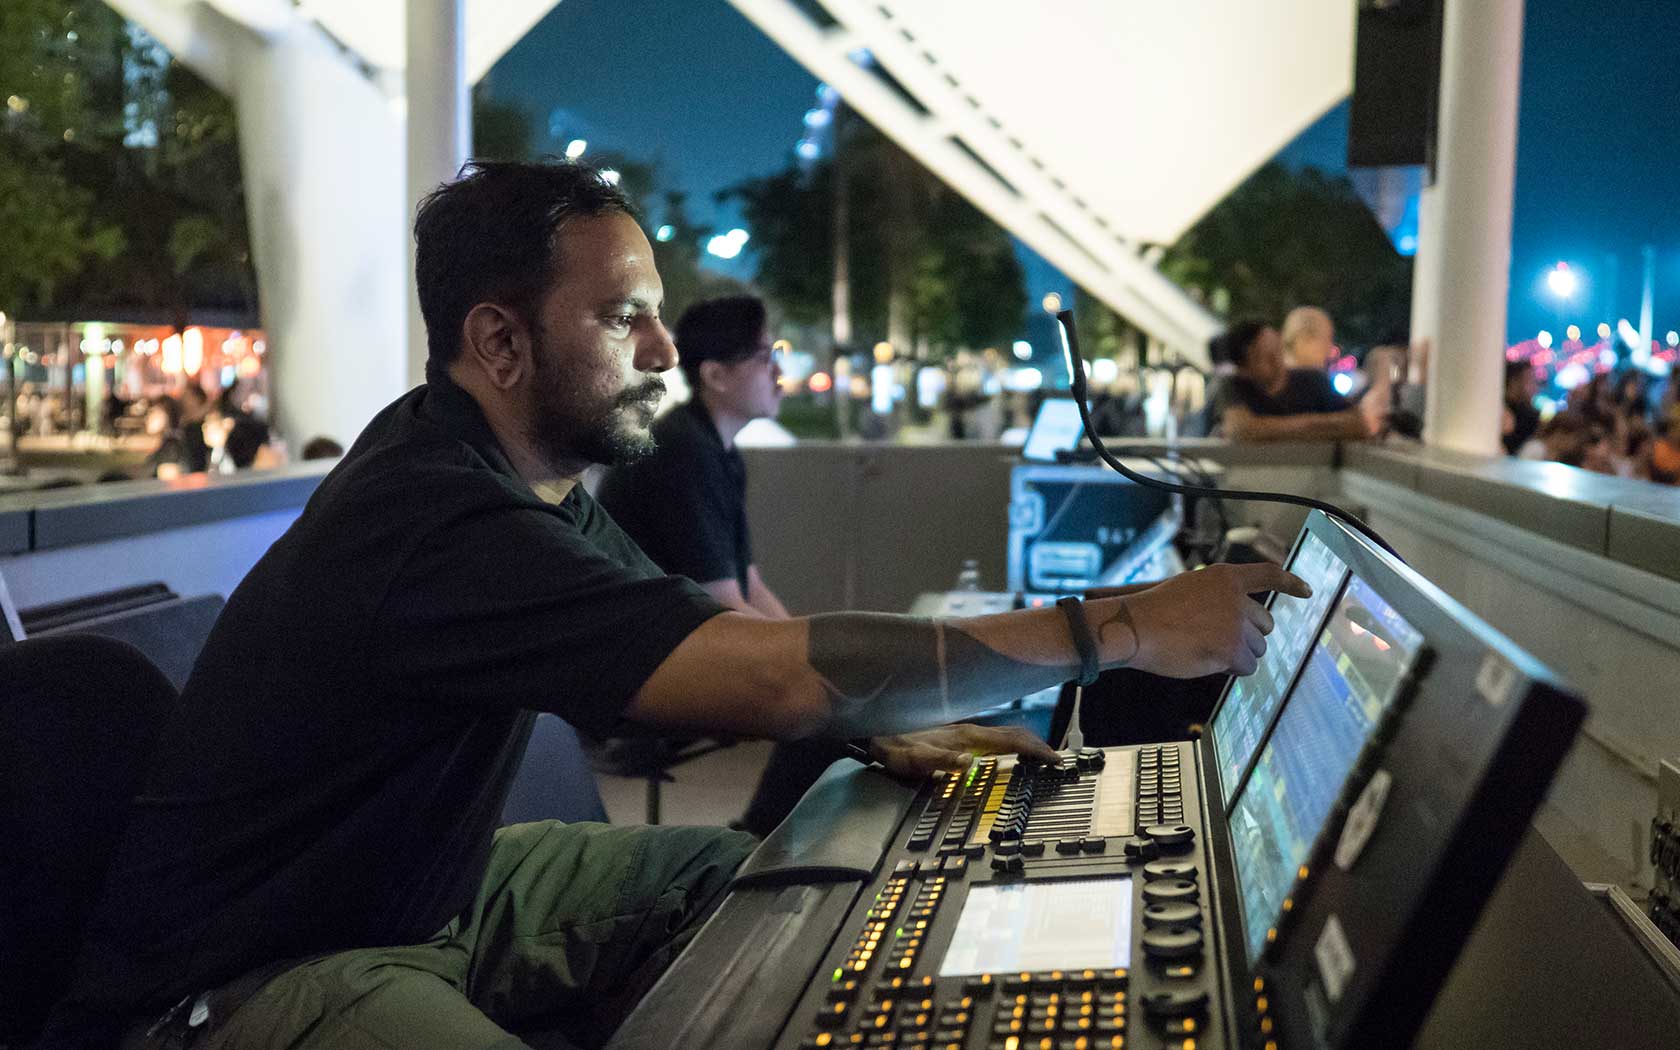 Image depicting a technician at the sound console at Esplanade Outdoor Theatre.